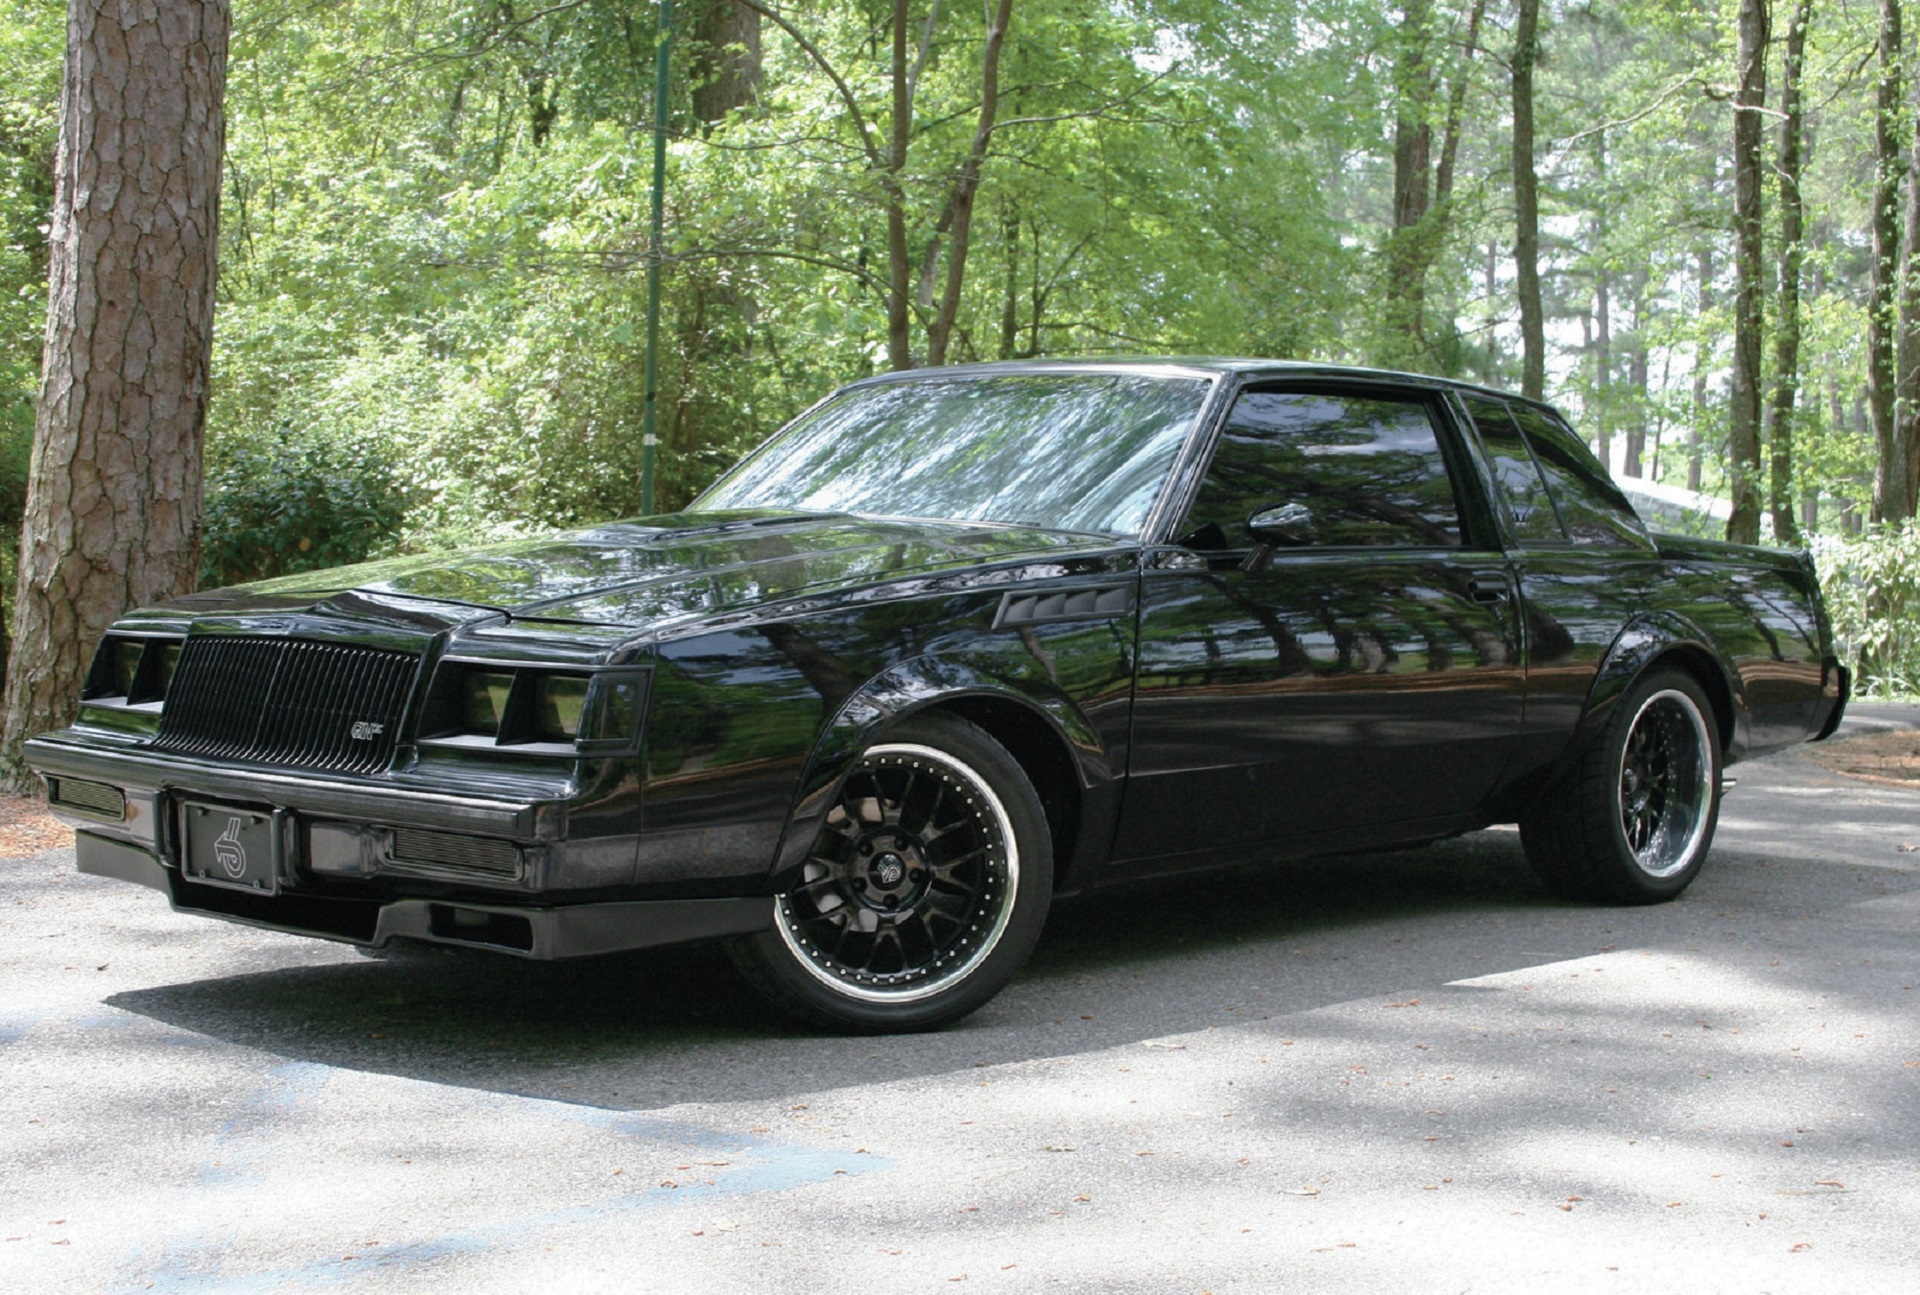 Buick Grand National Wallpaper Image Photo Picture Background